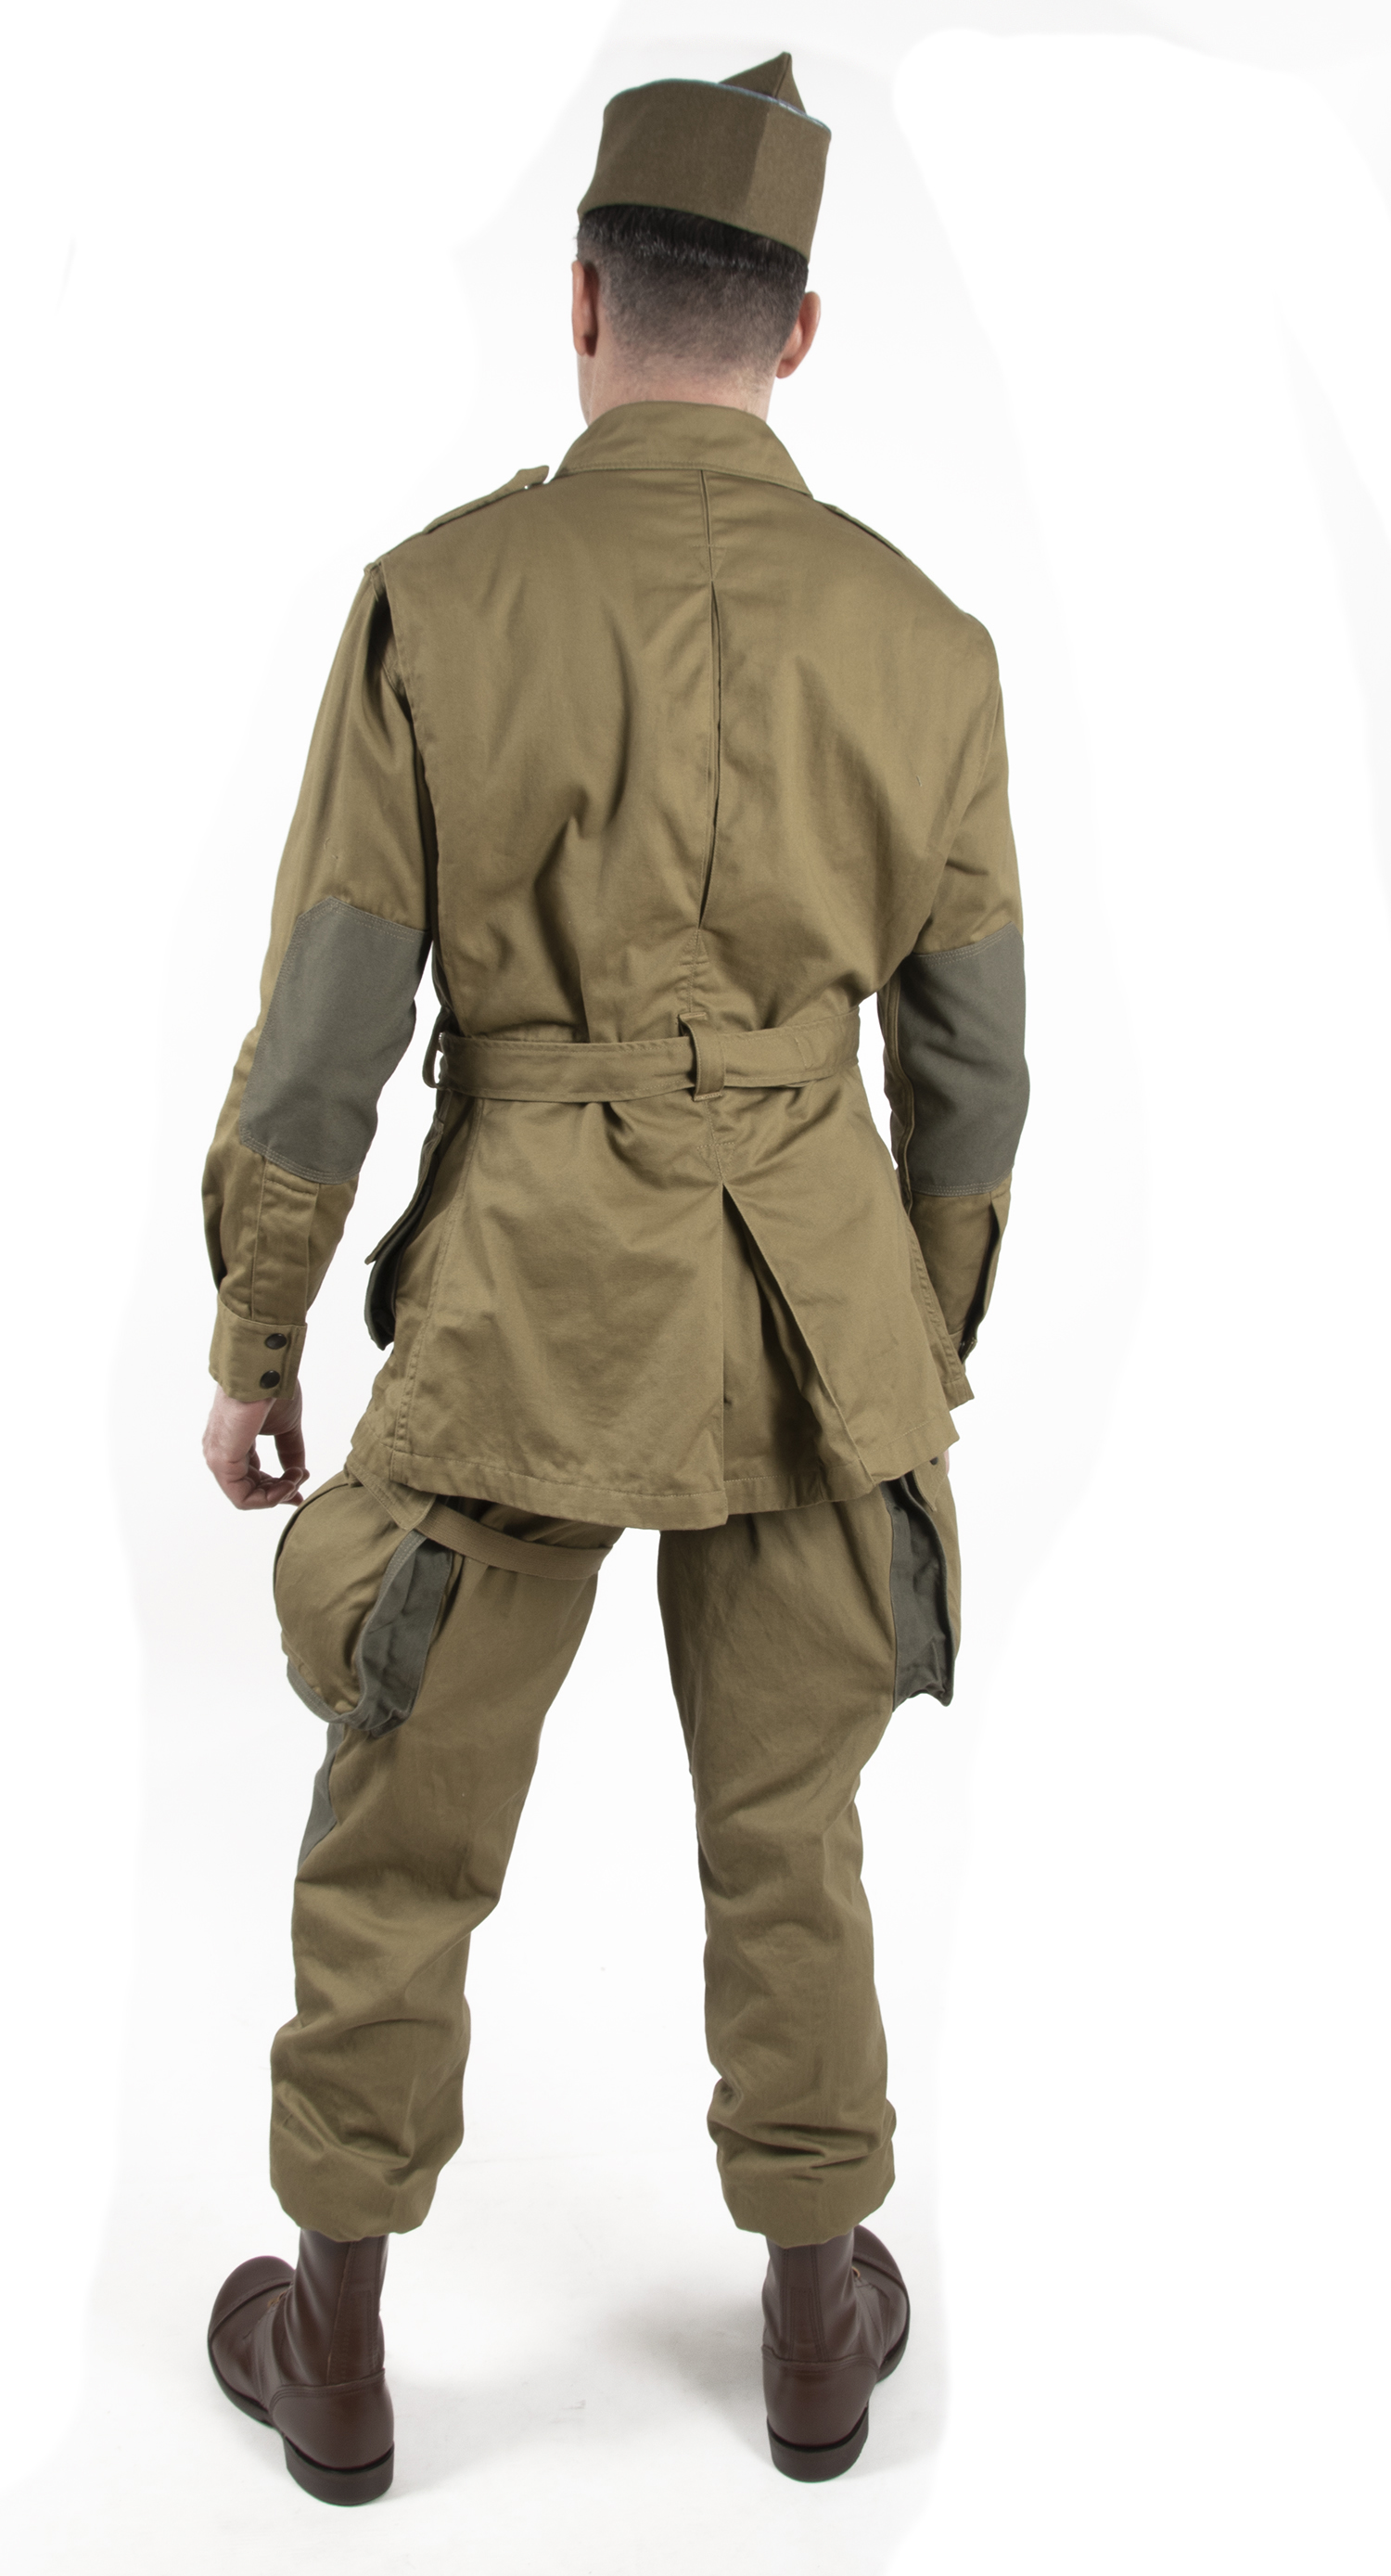 Reproduction WWII Paratrooper Uniform Package